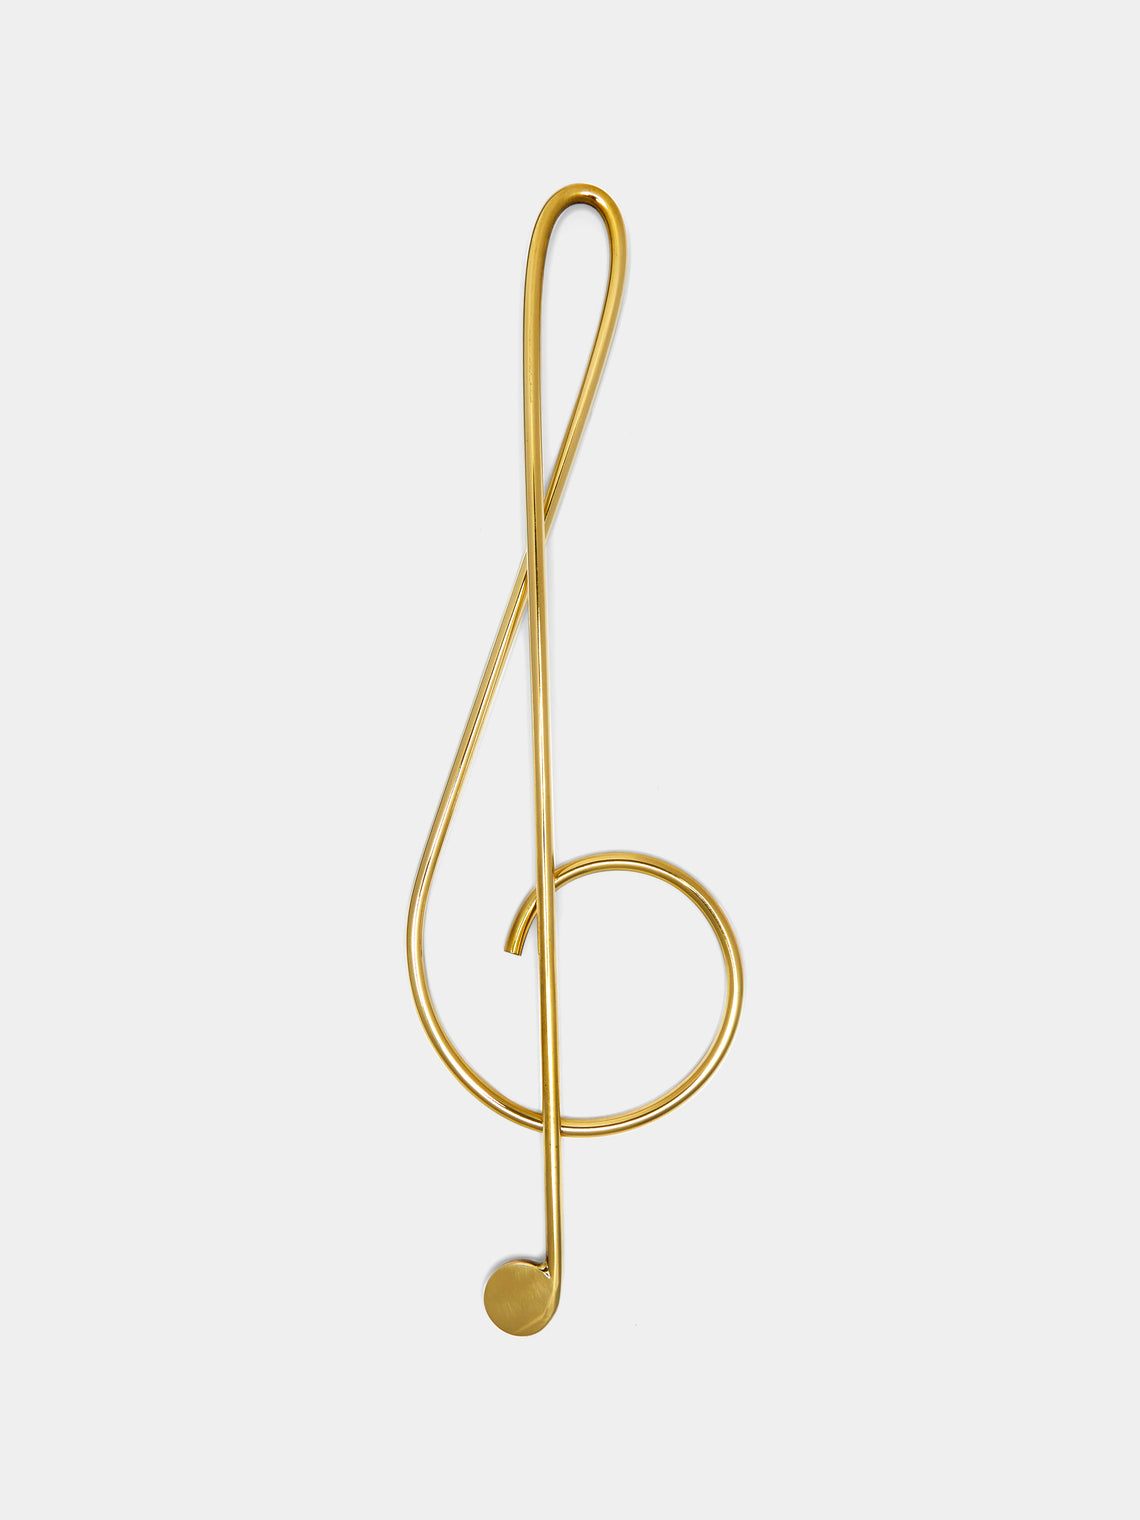 Carl Auböck - Brass Oversized Musical Clef Paperclip - Gold - ABASK - 